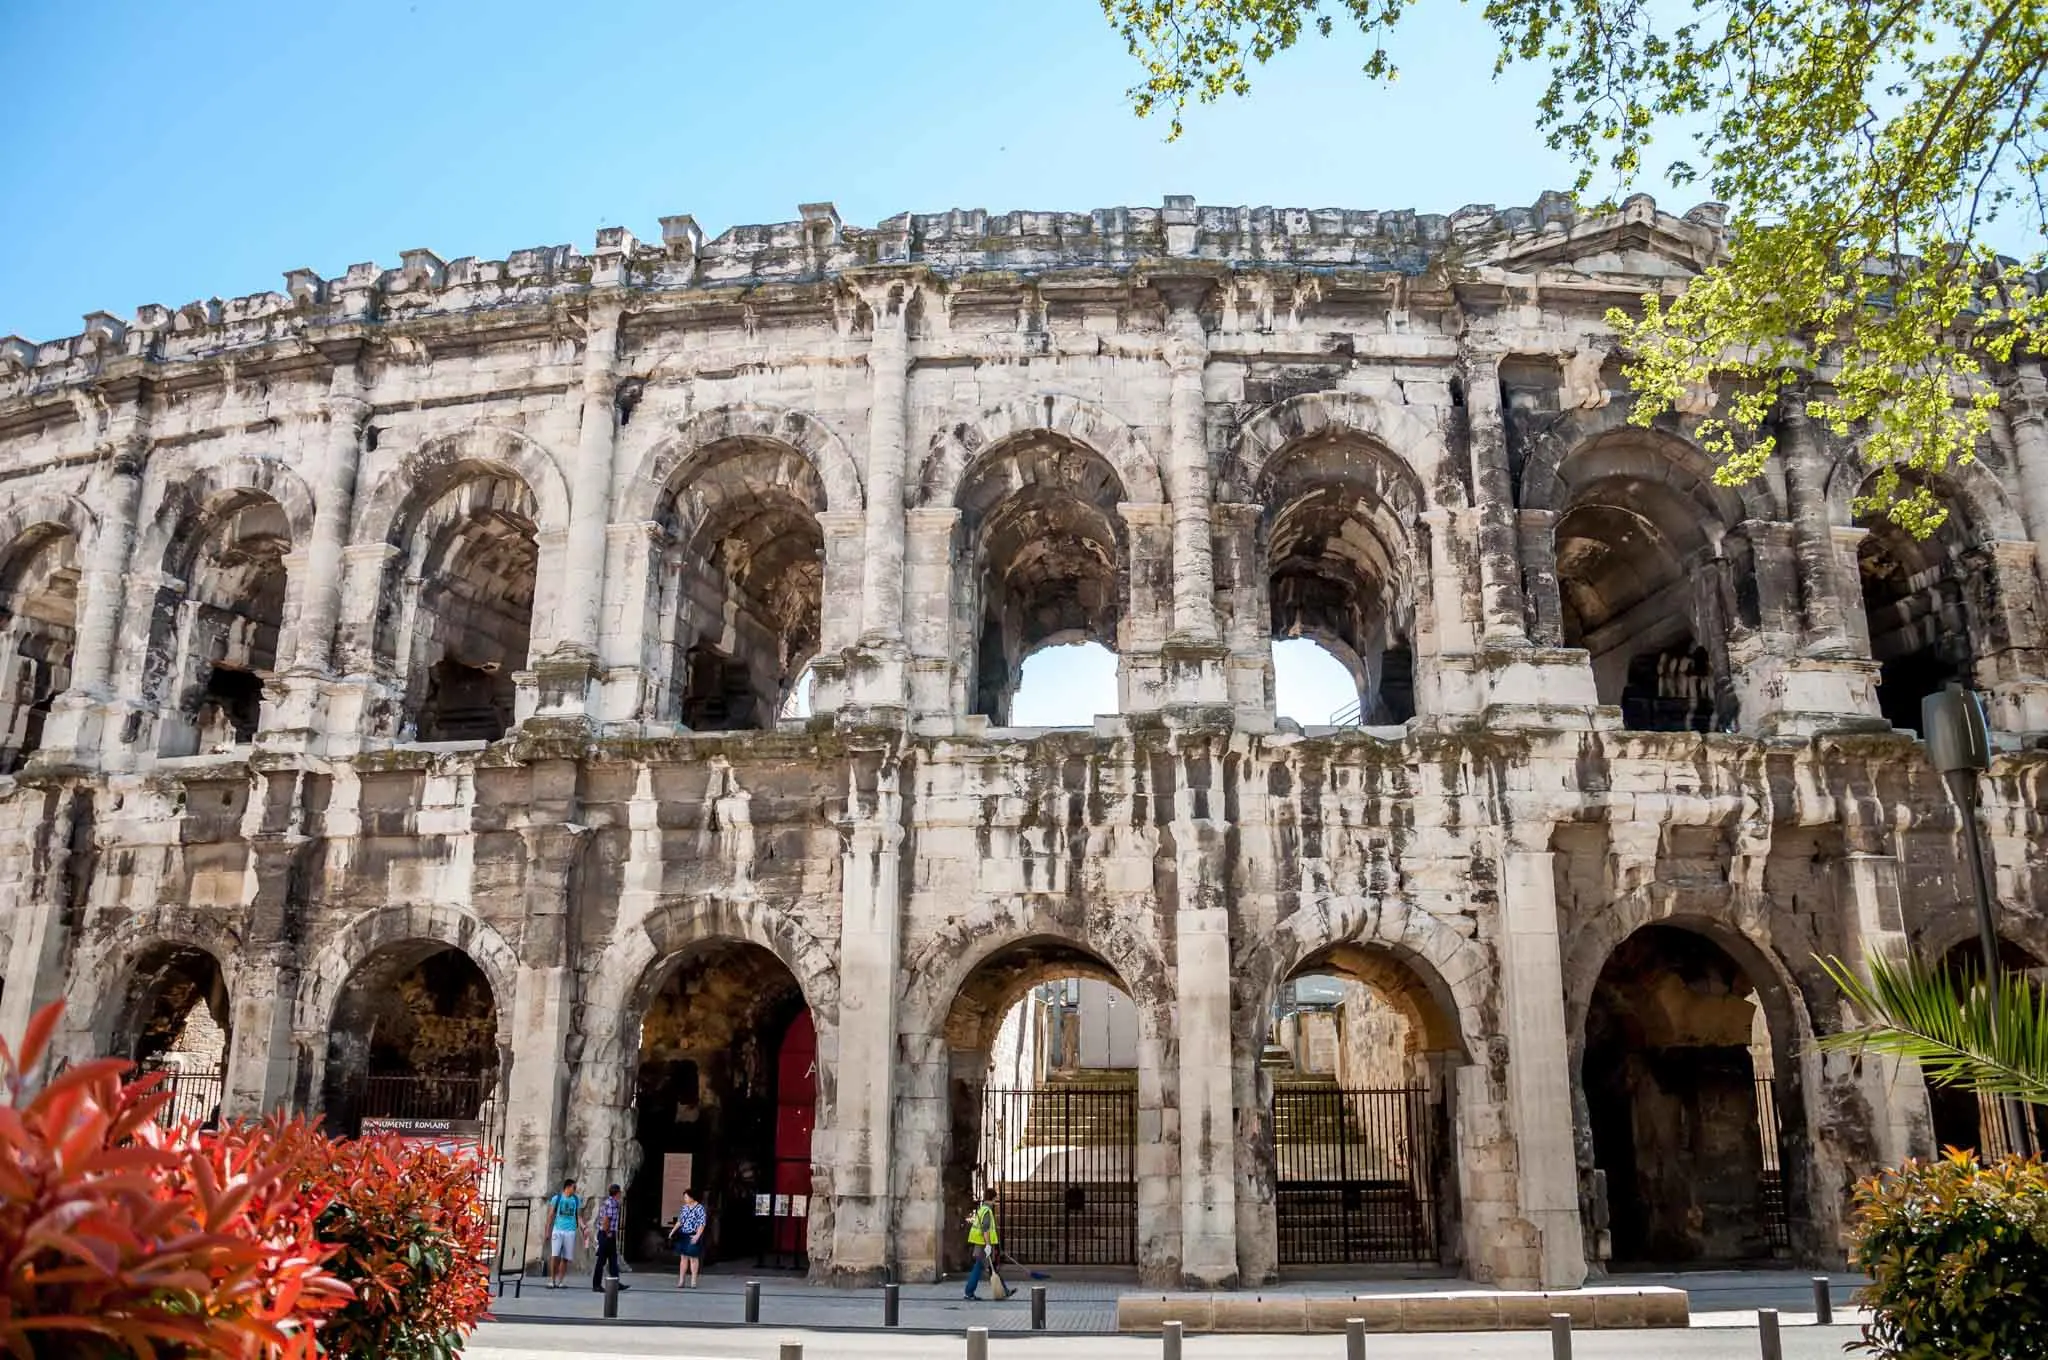 The Arena of Nimes in southern France is still in use